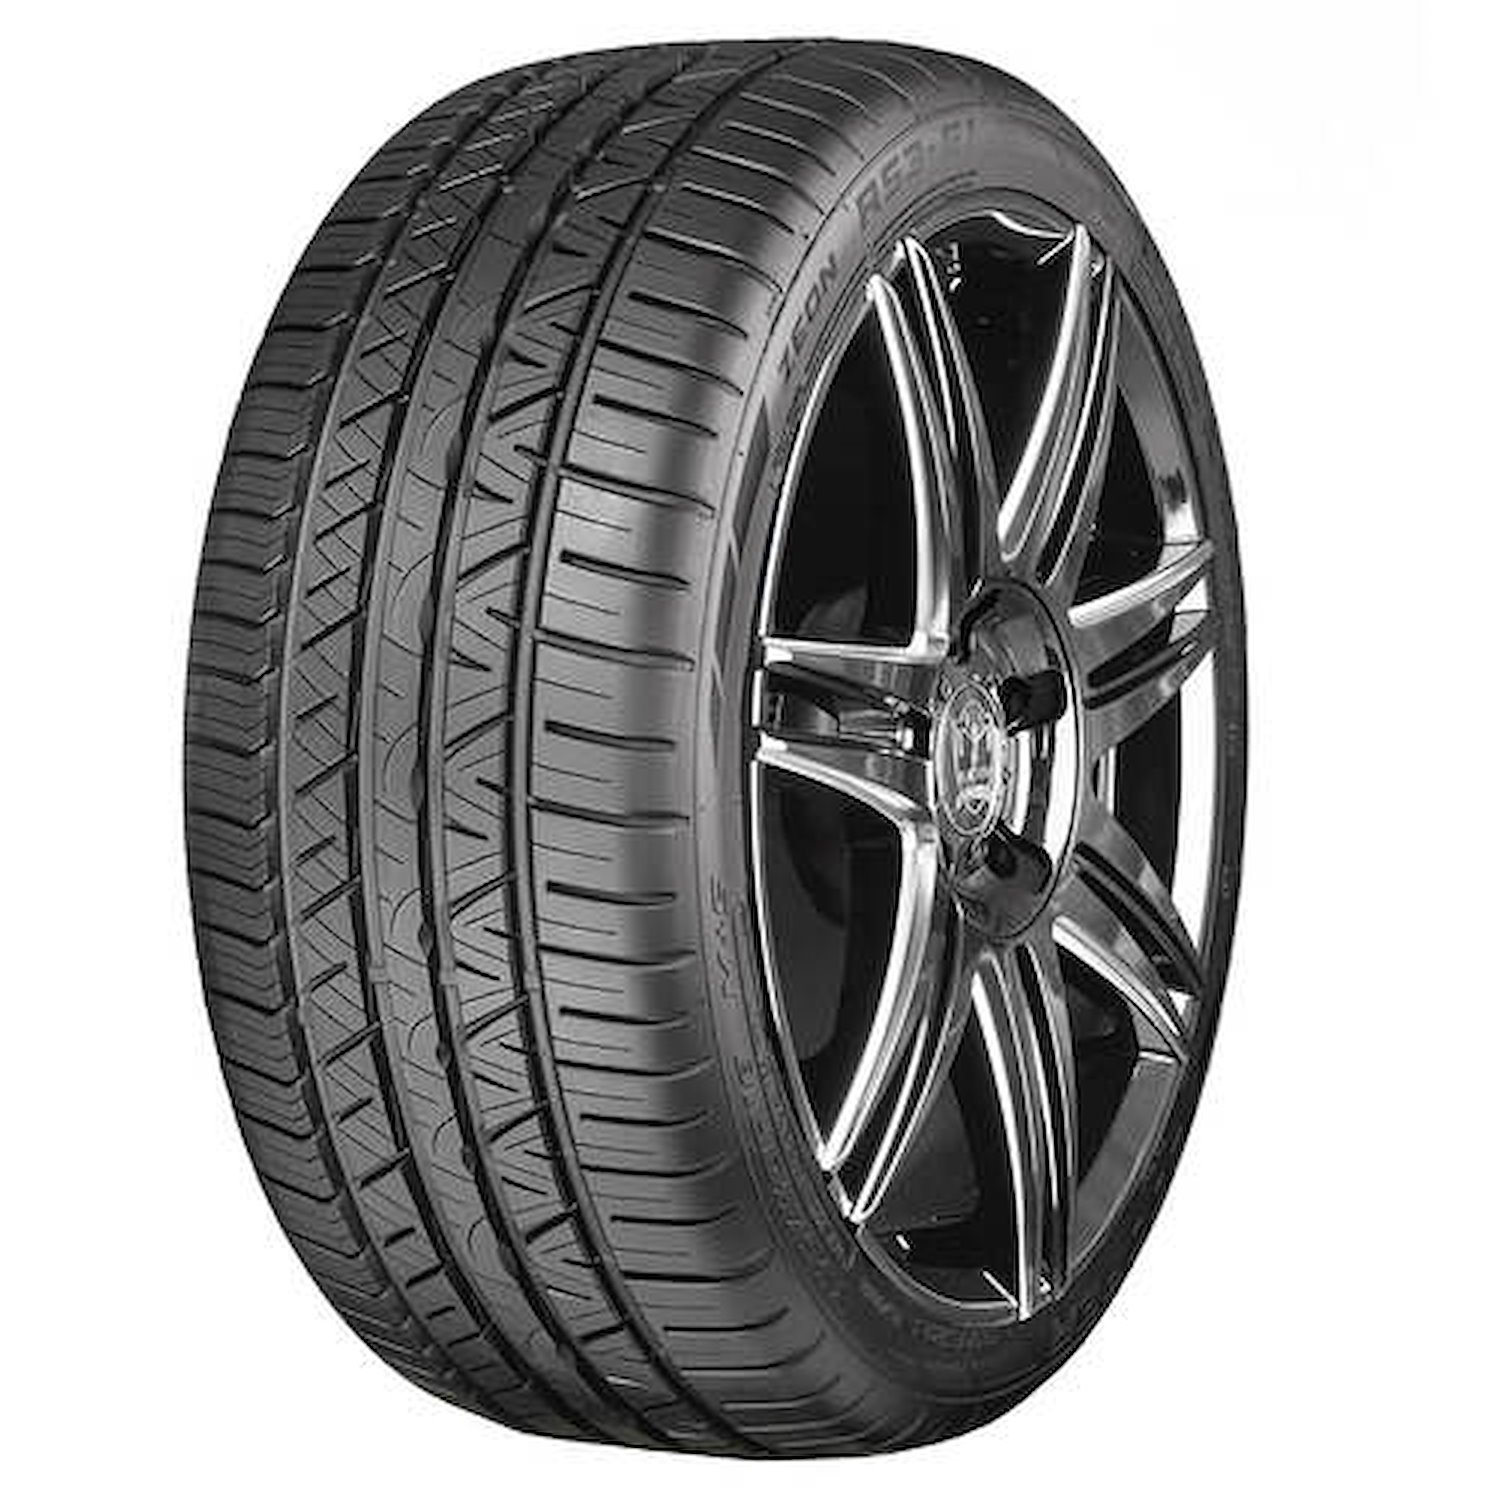 Zeon RS3-G1 High-Performance Tire, 245/40R17